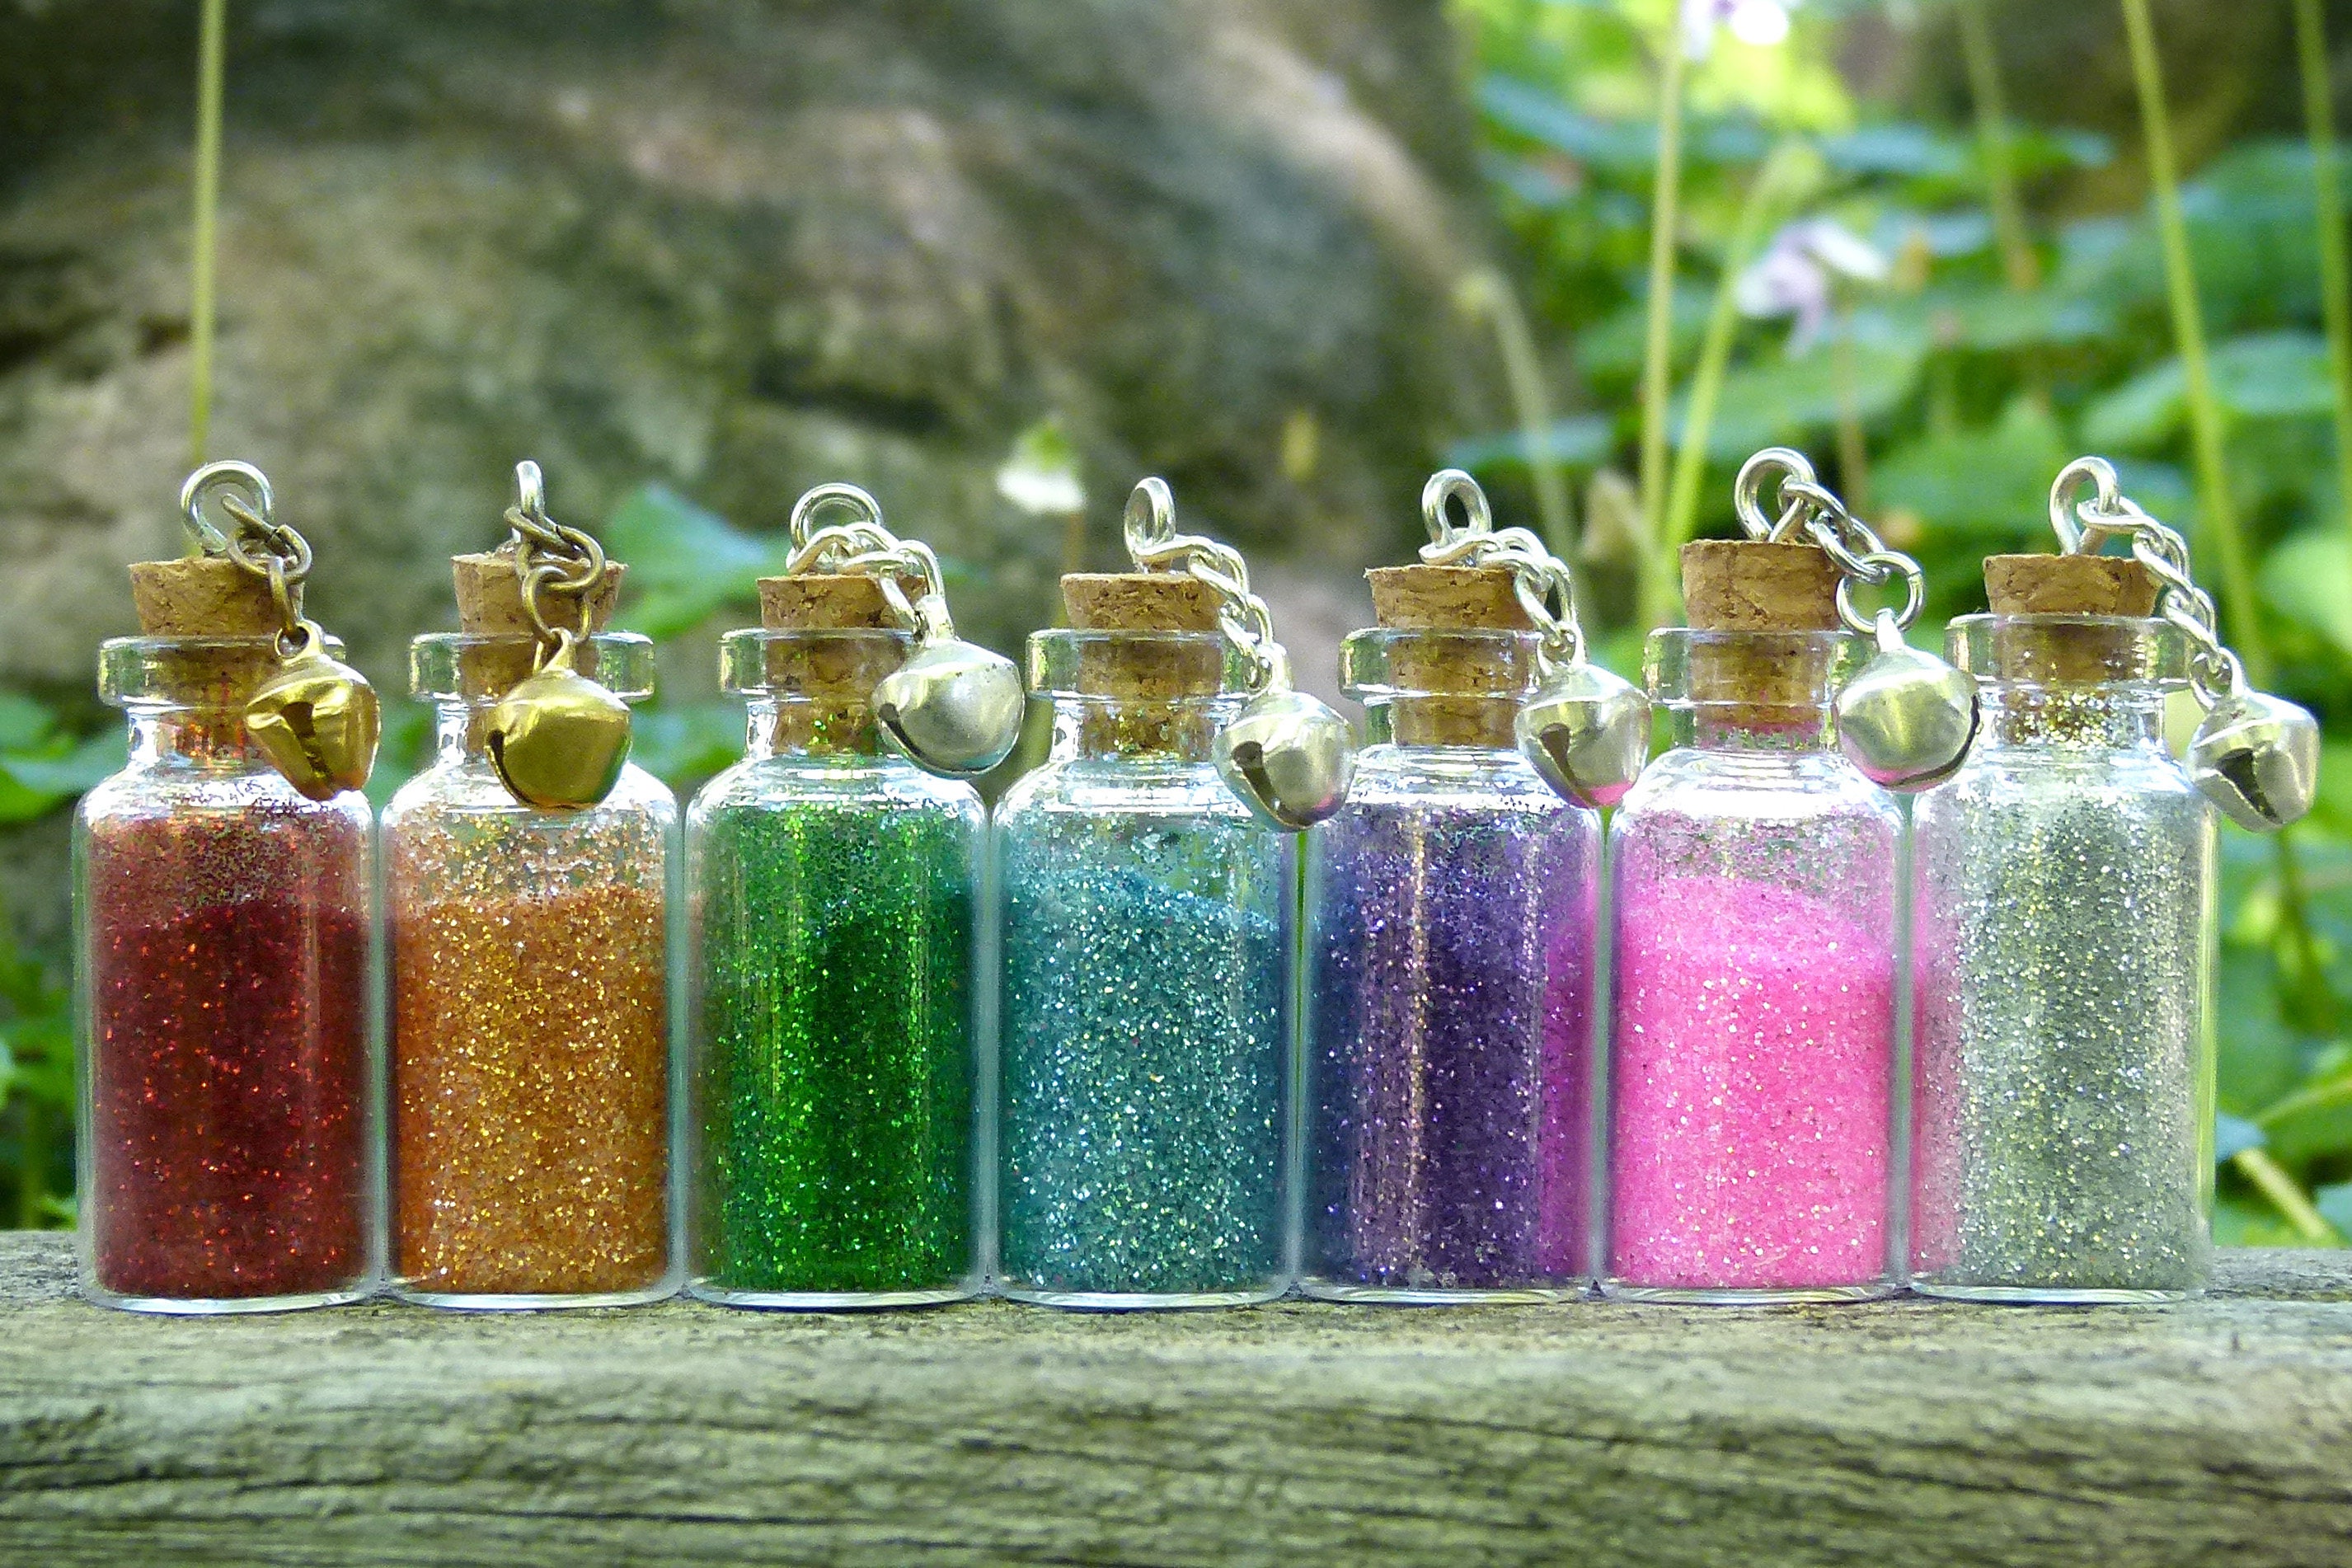 12Colors glass fairy dust bottles with opalescent glitter confetti